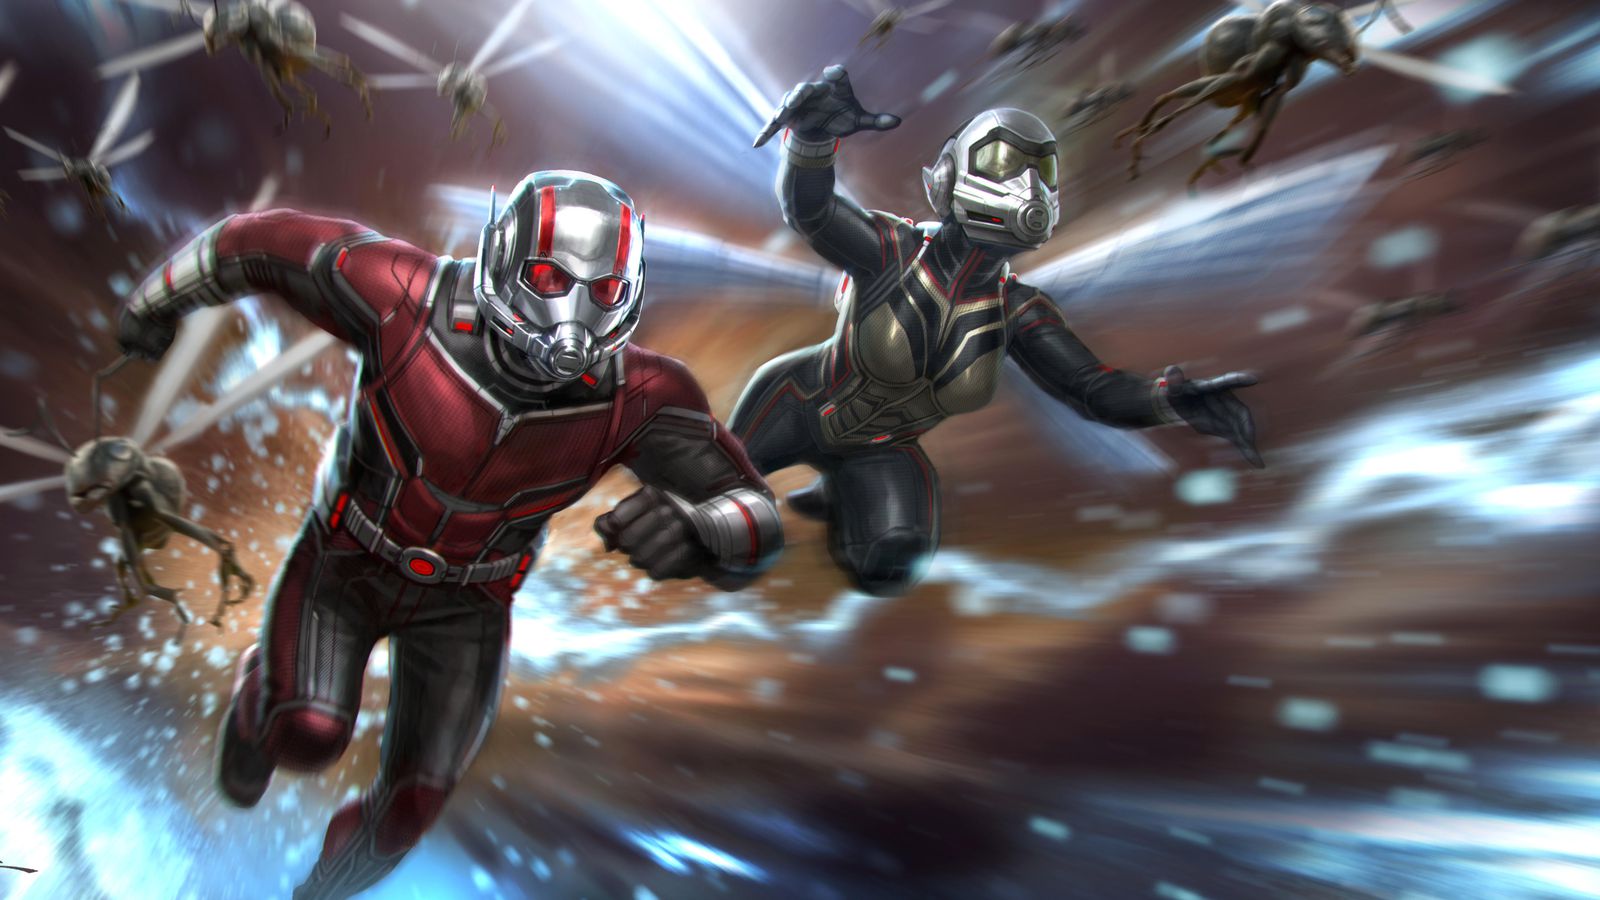 AntMan and Wasp